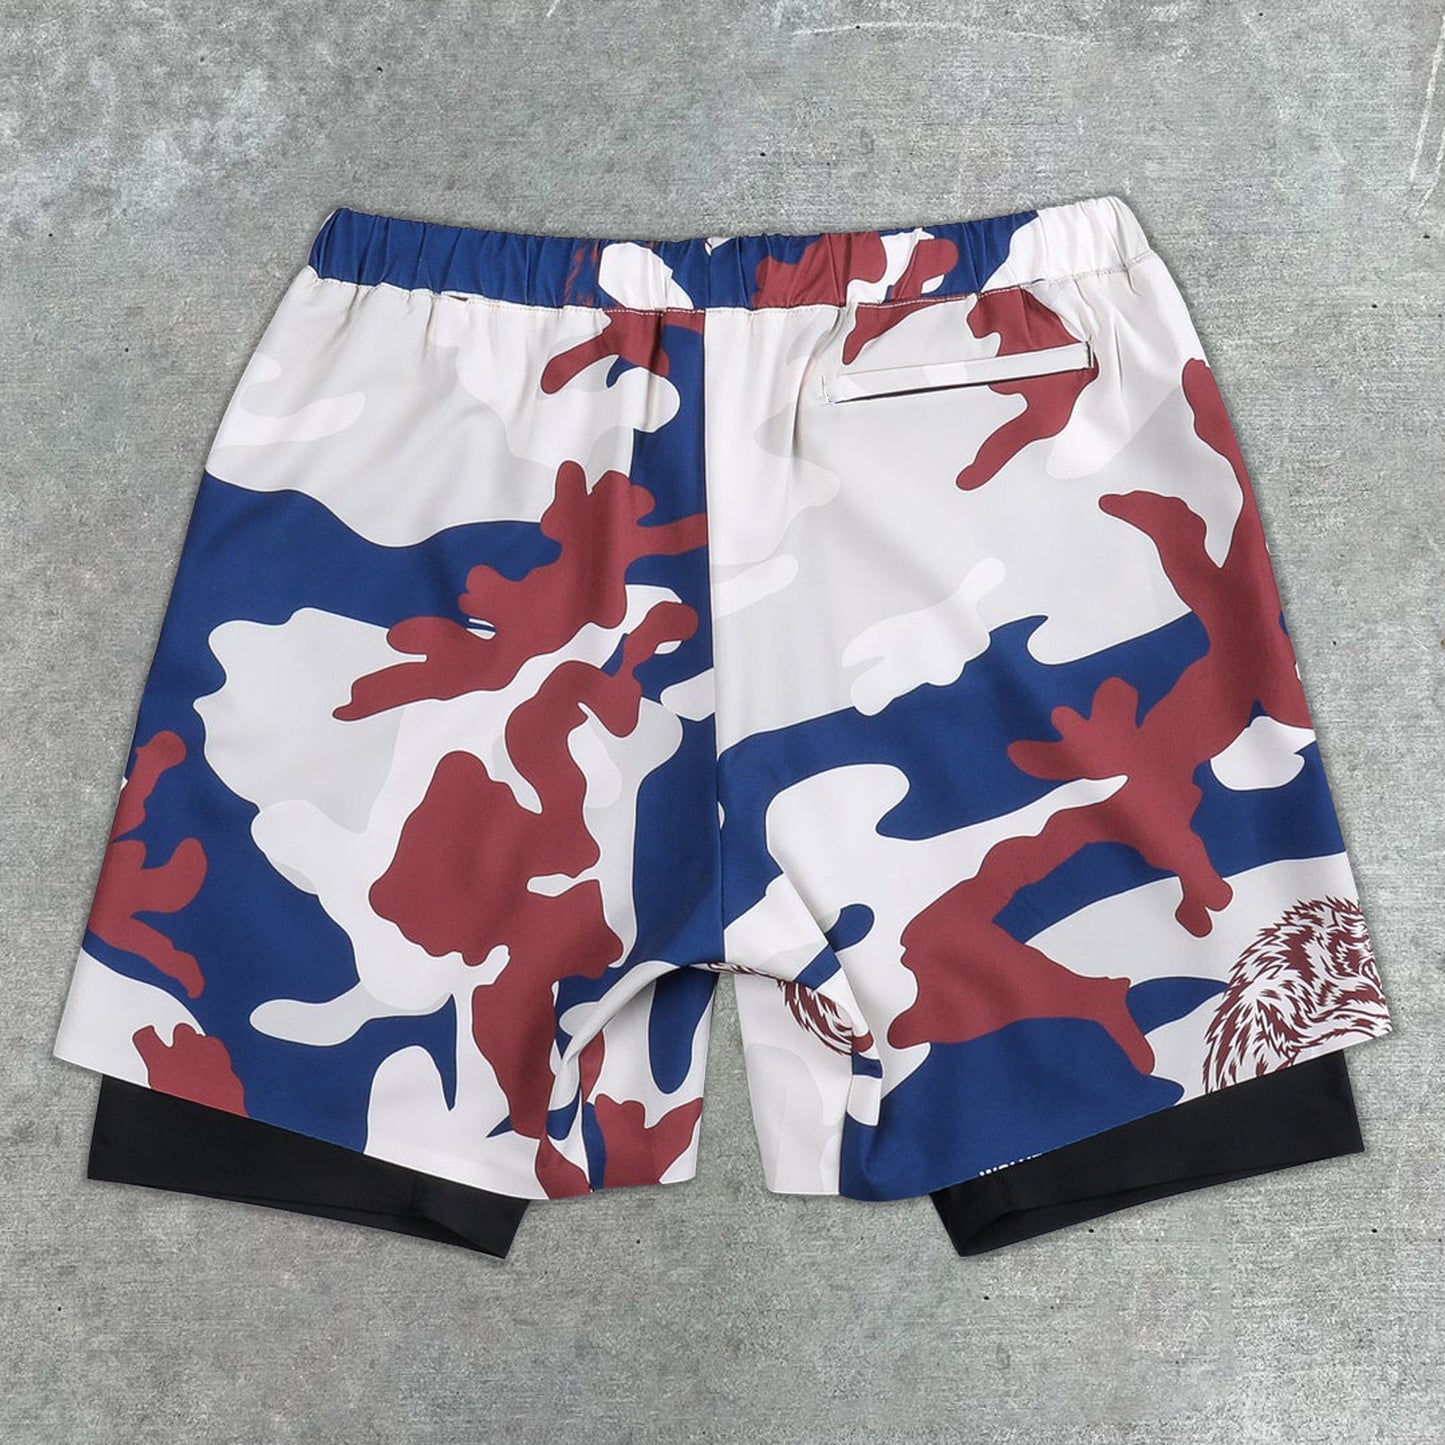 Fashion Camouflage Fitness Swimming Sports Quick Dry Shorts